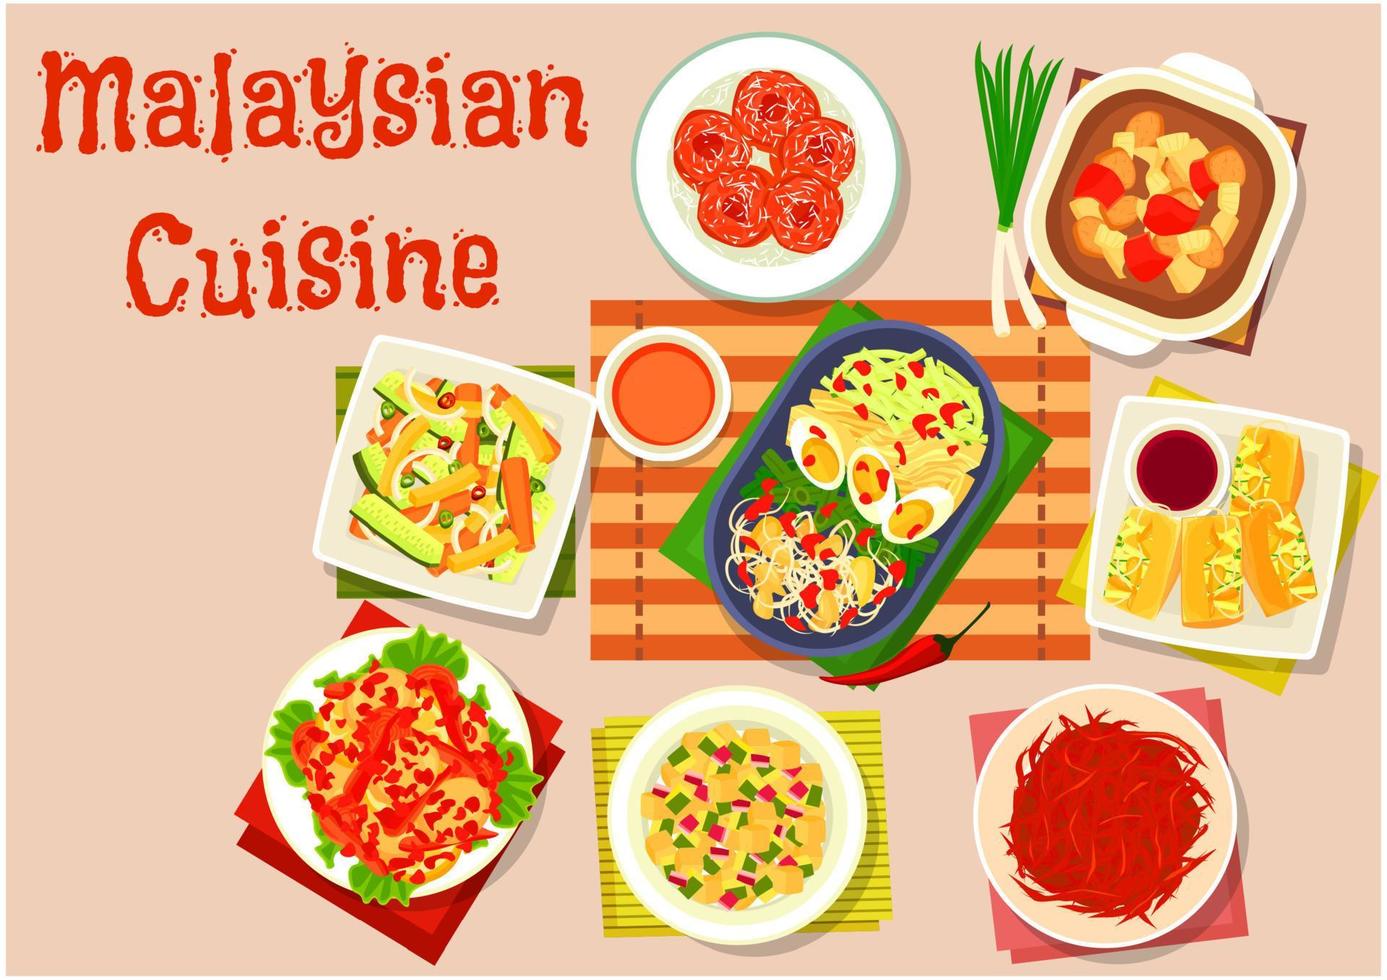 Malaysian cuisine salad and soup dishes icon vector